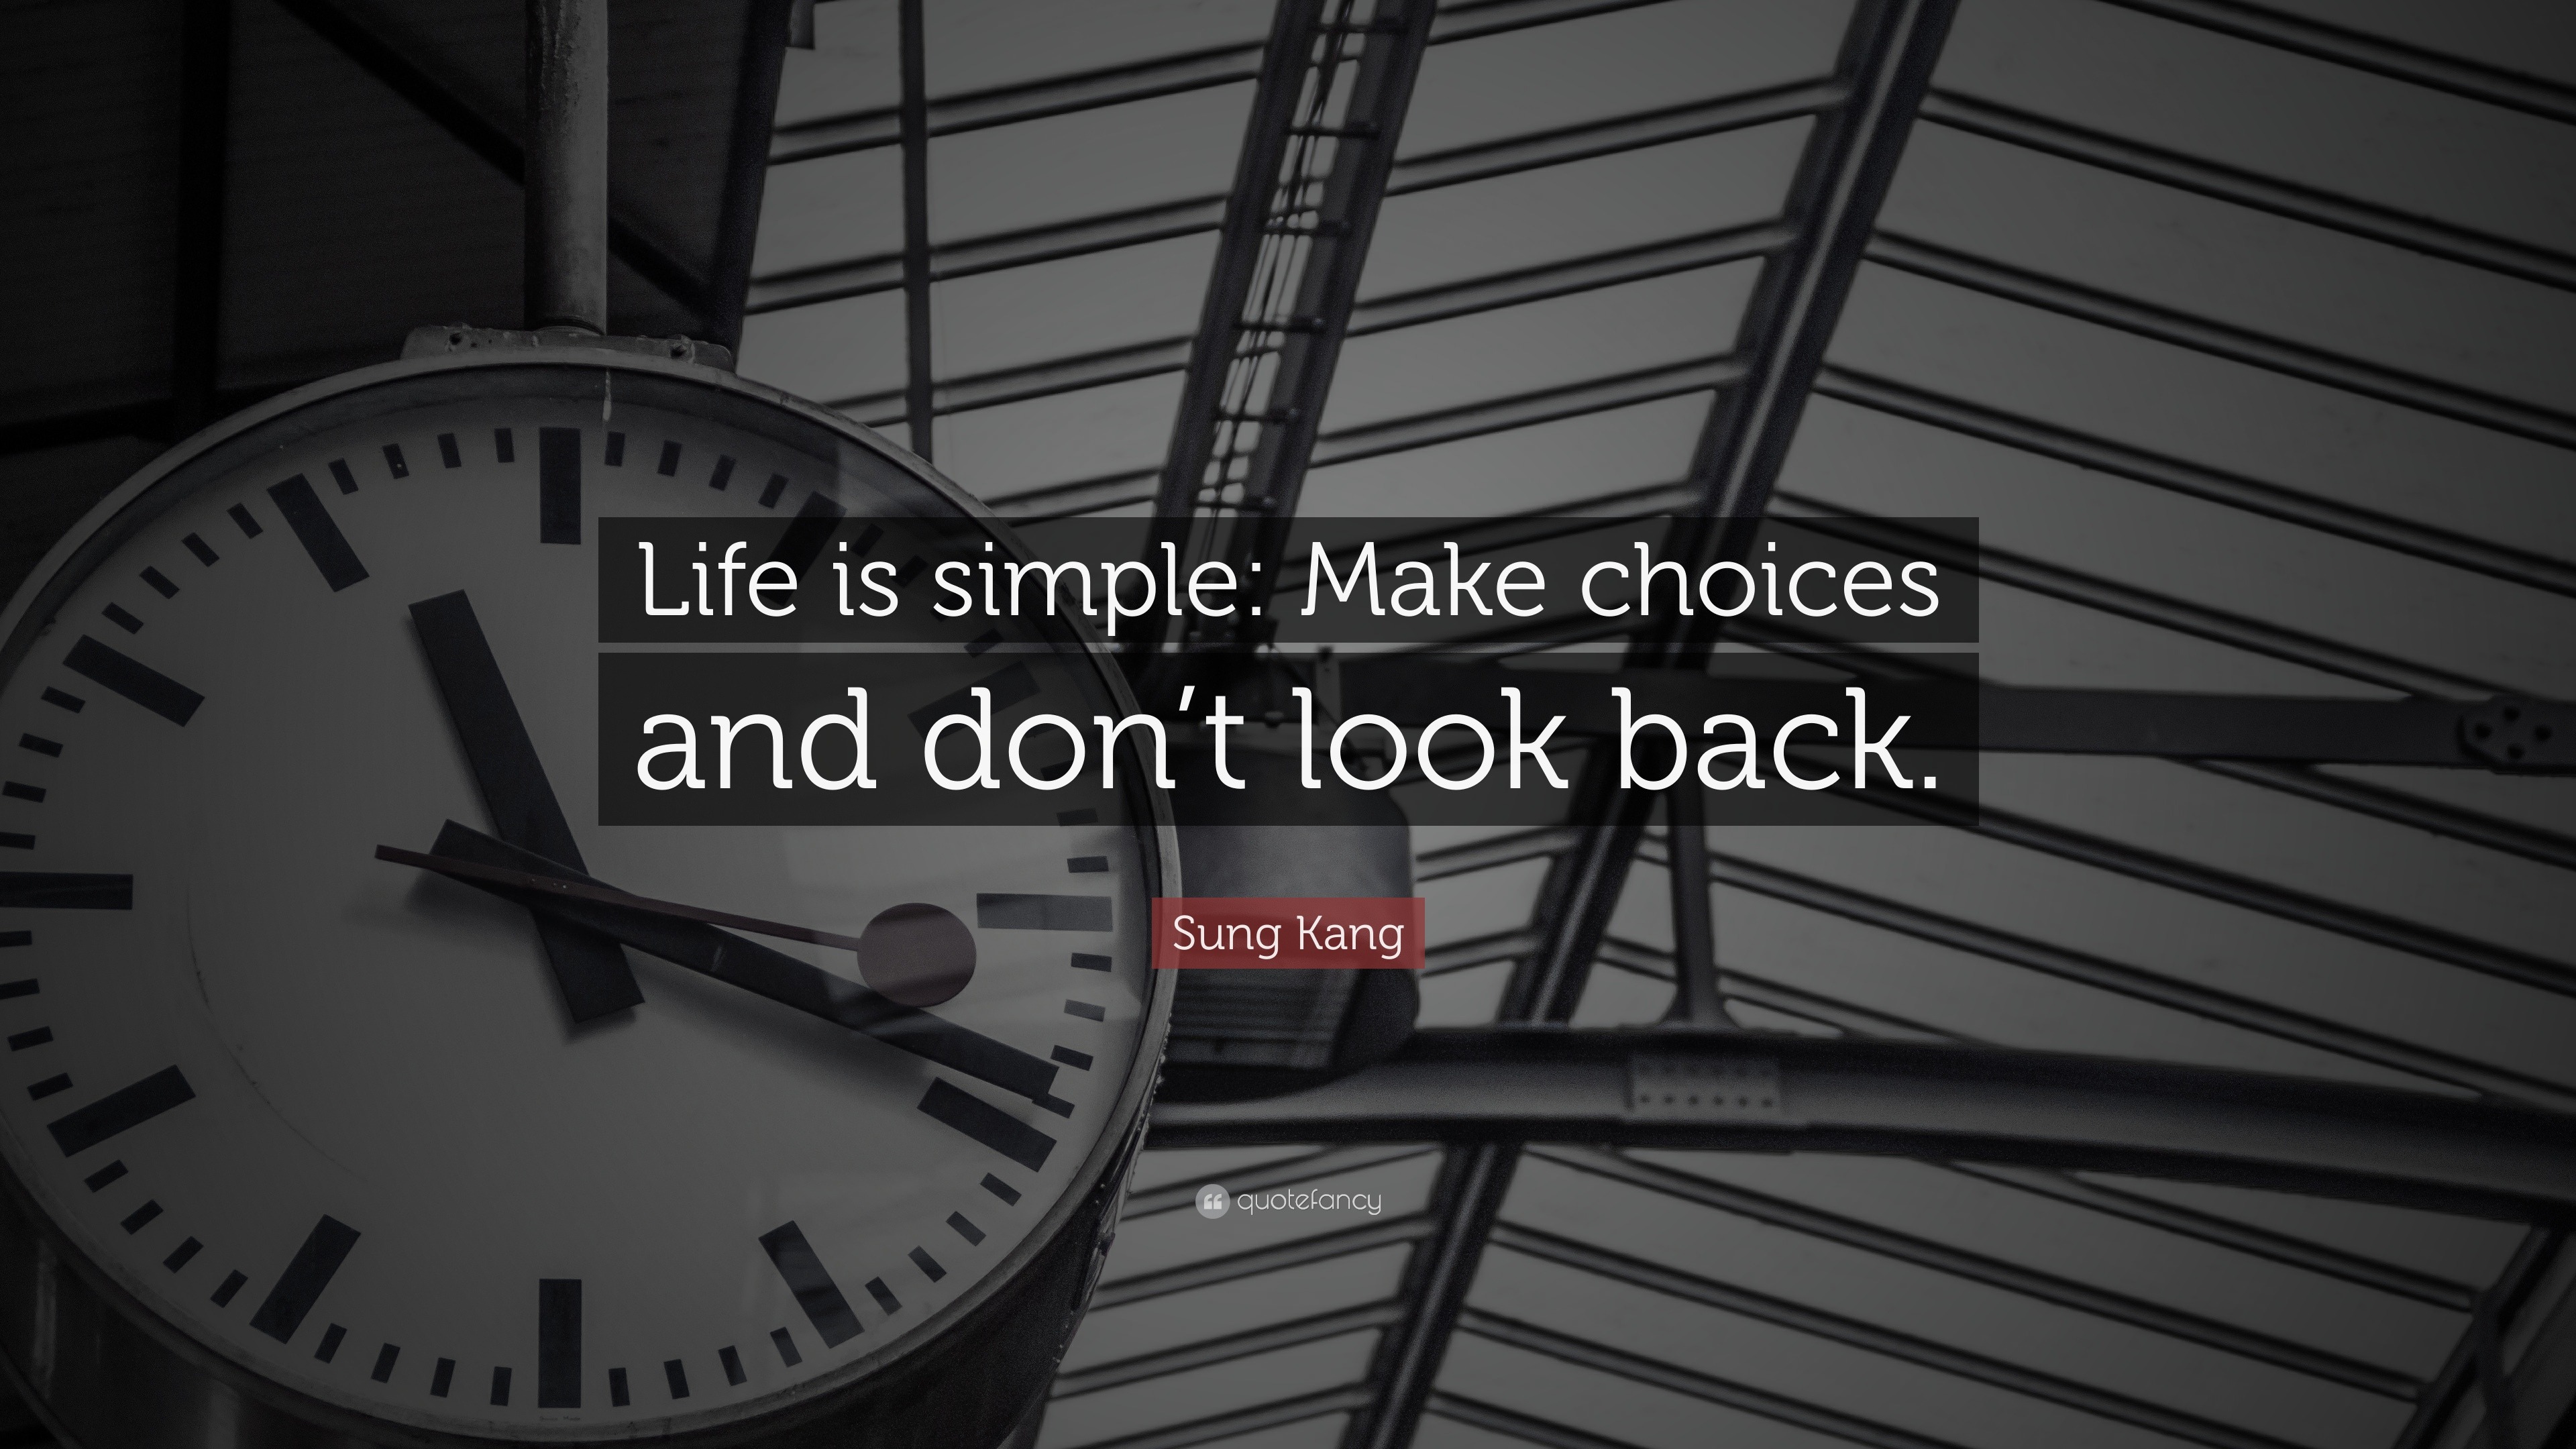 https://quotefancy.com/media/wallpaper/3840x2160/1652642-Sung-Kang-Quote-Life-is-simple-Make-choices-and-don-t-look-back.jpg